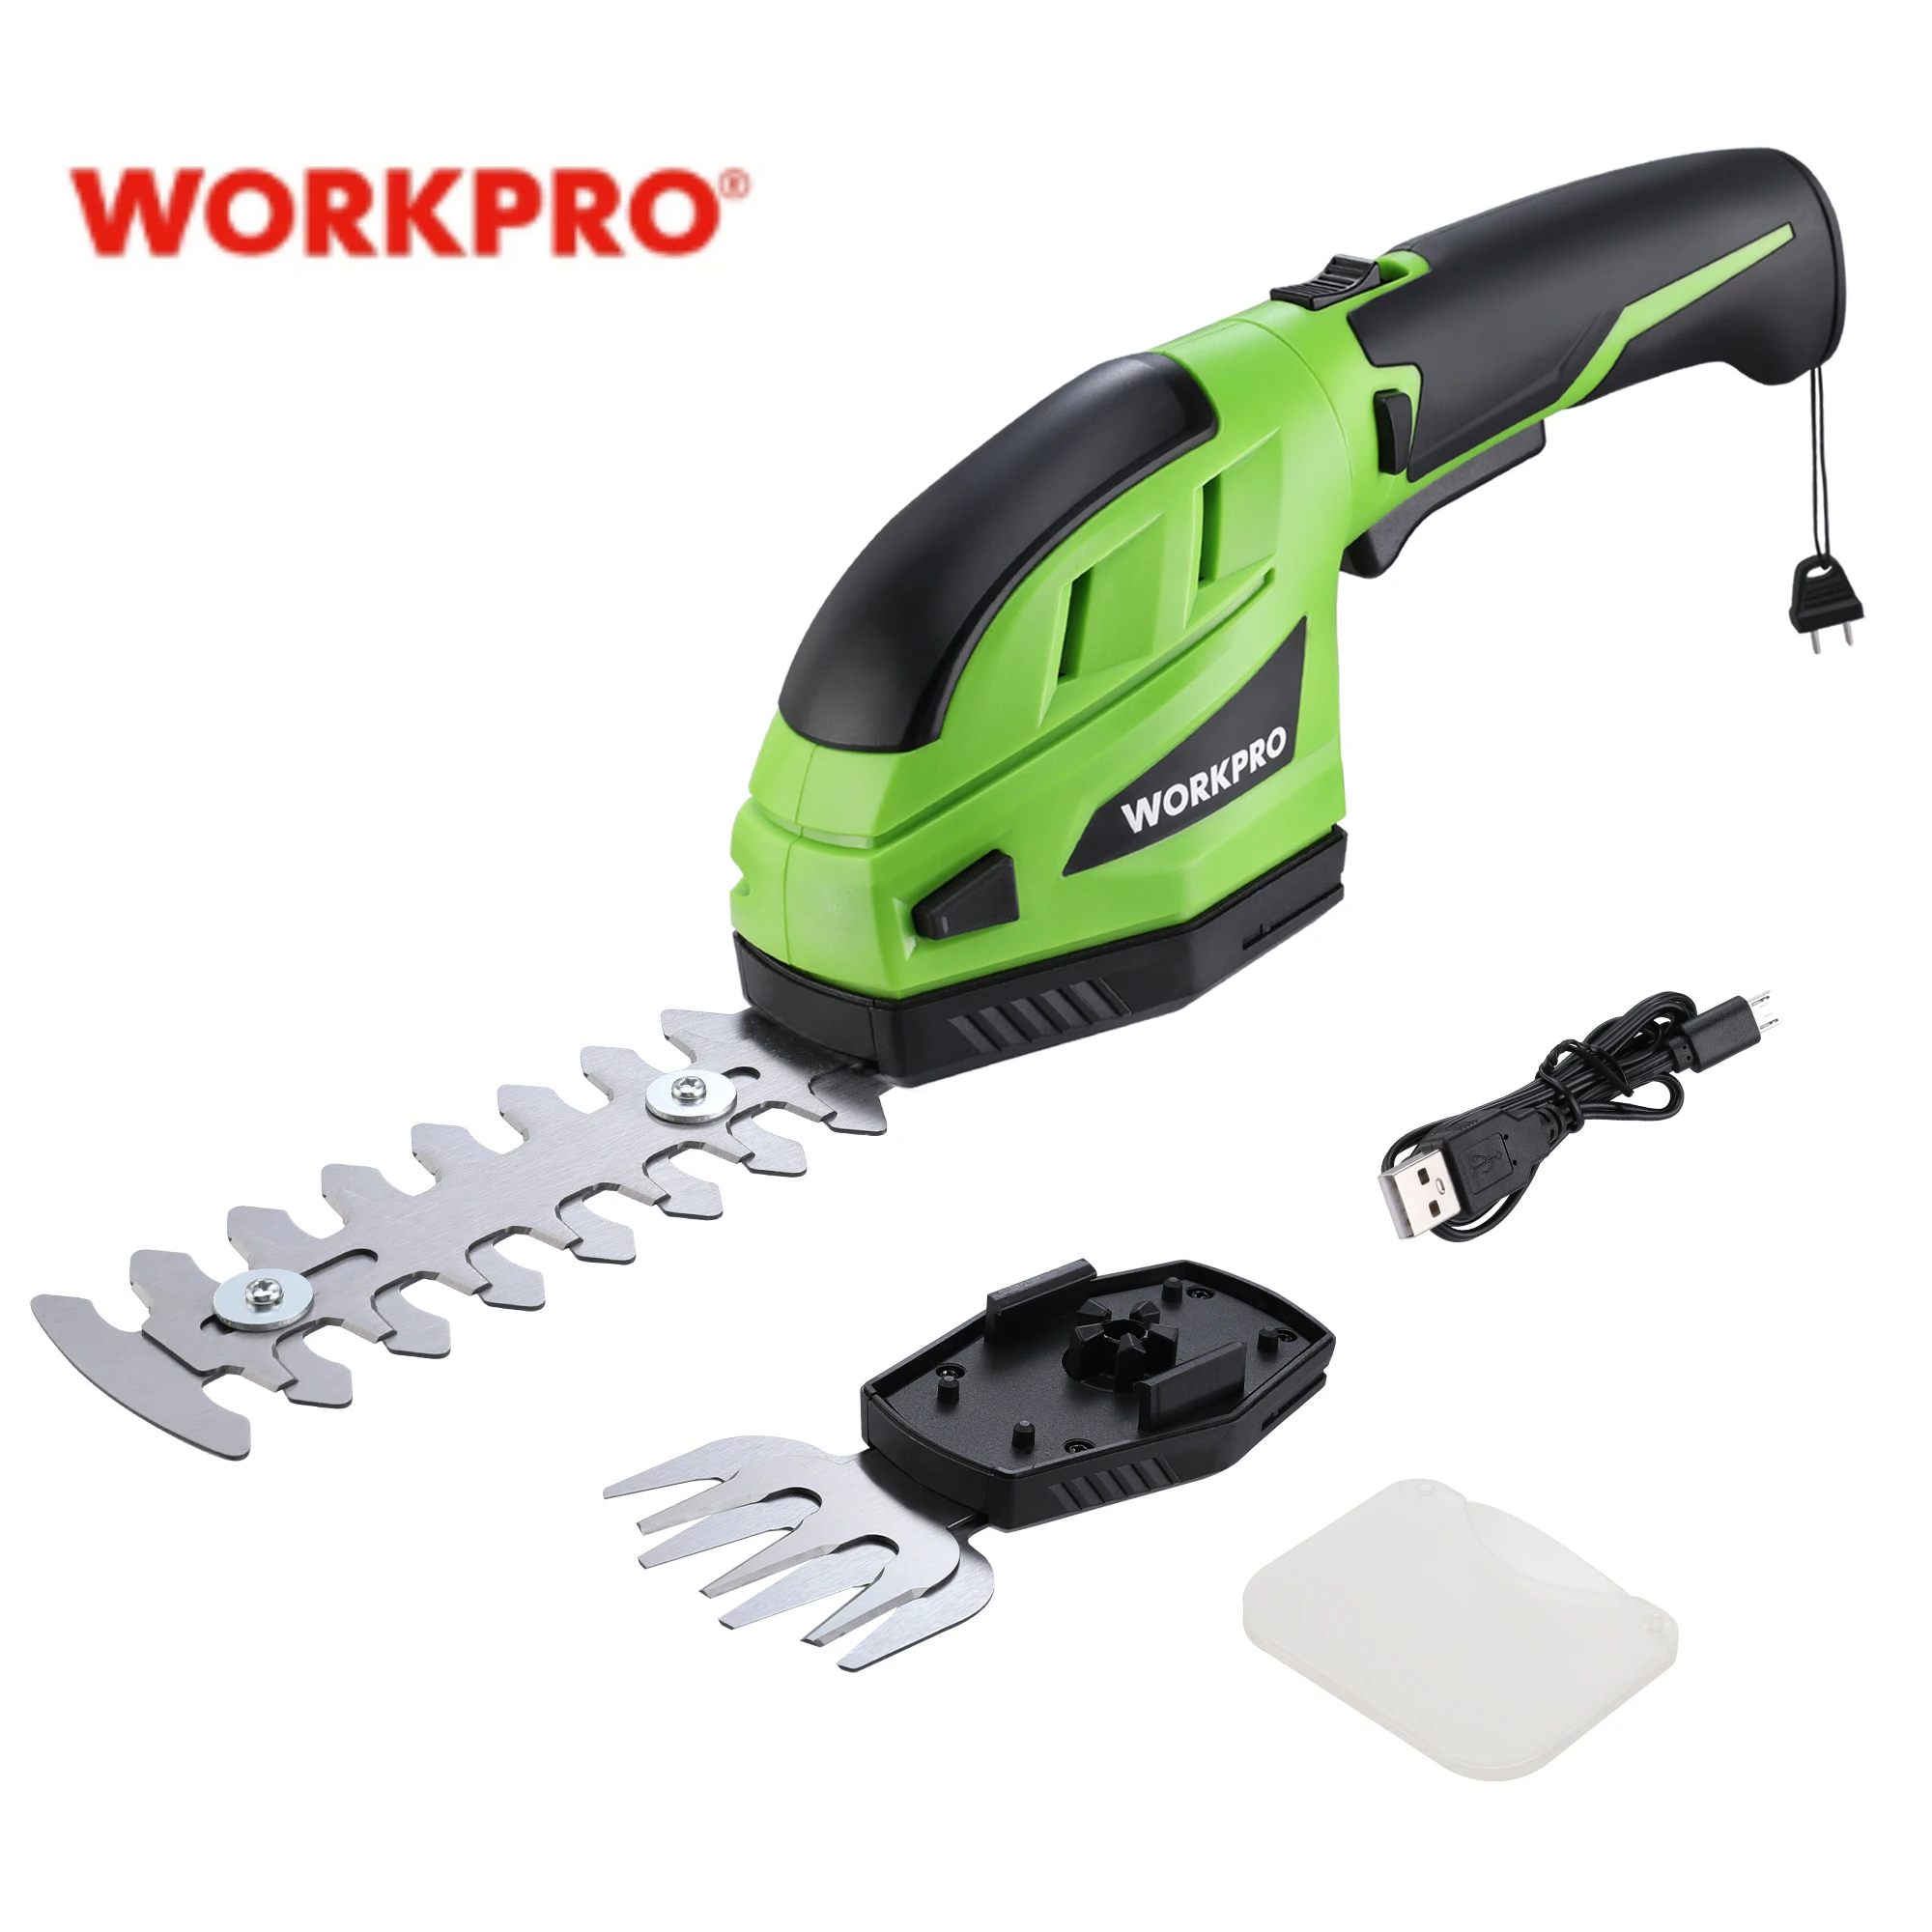 WORKPRO Battery Grass and Shrub Shears, Handy Grass Shears, 3.6V, 2000 mAh, 2 Different Blades, with Battery and Charging Cable